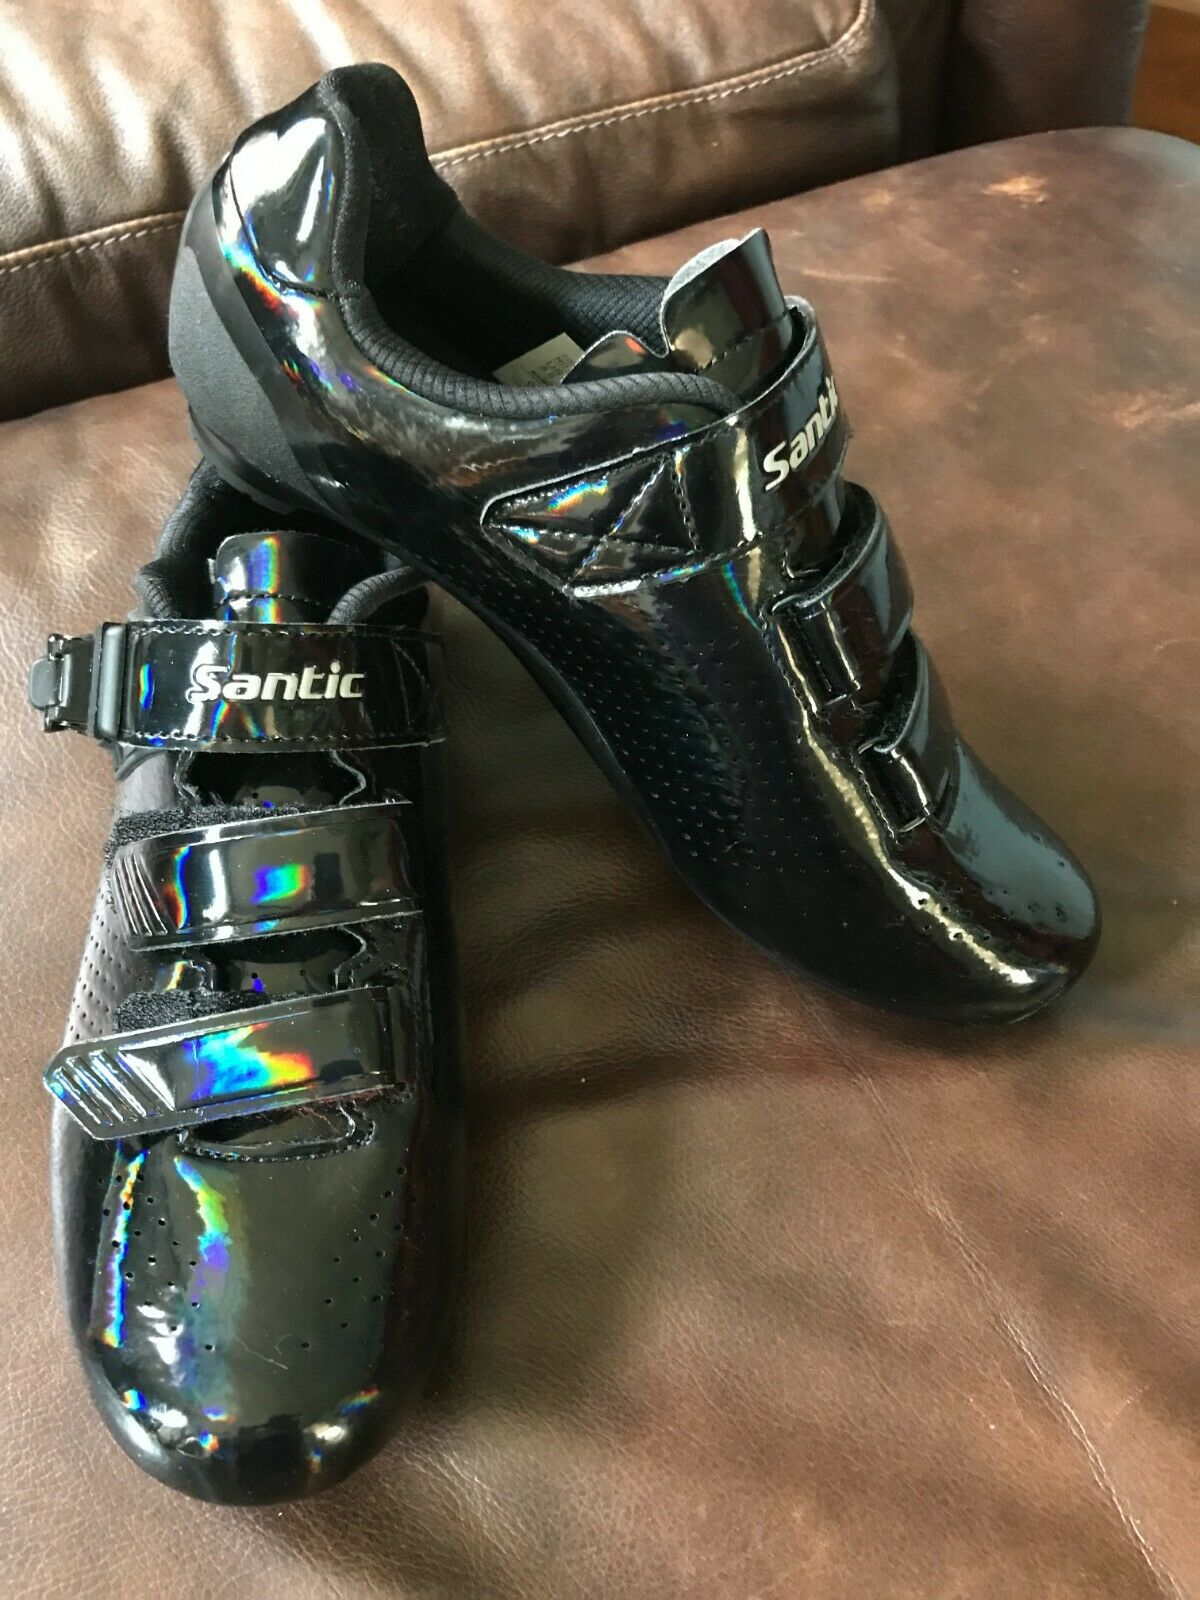 Santic Cycle Shoes Bike Shoes Cycling Shoes Size 42